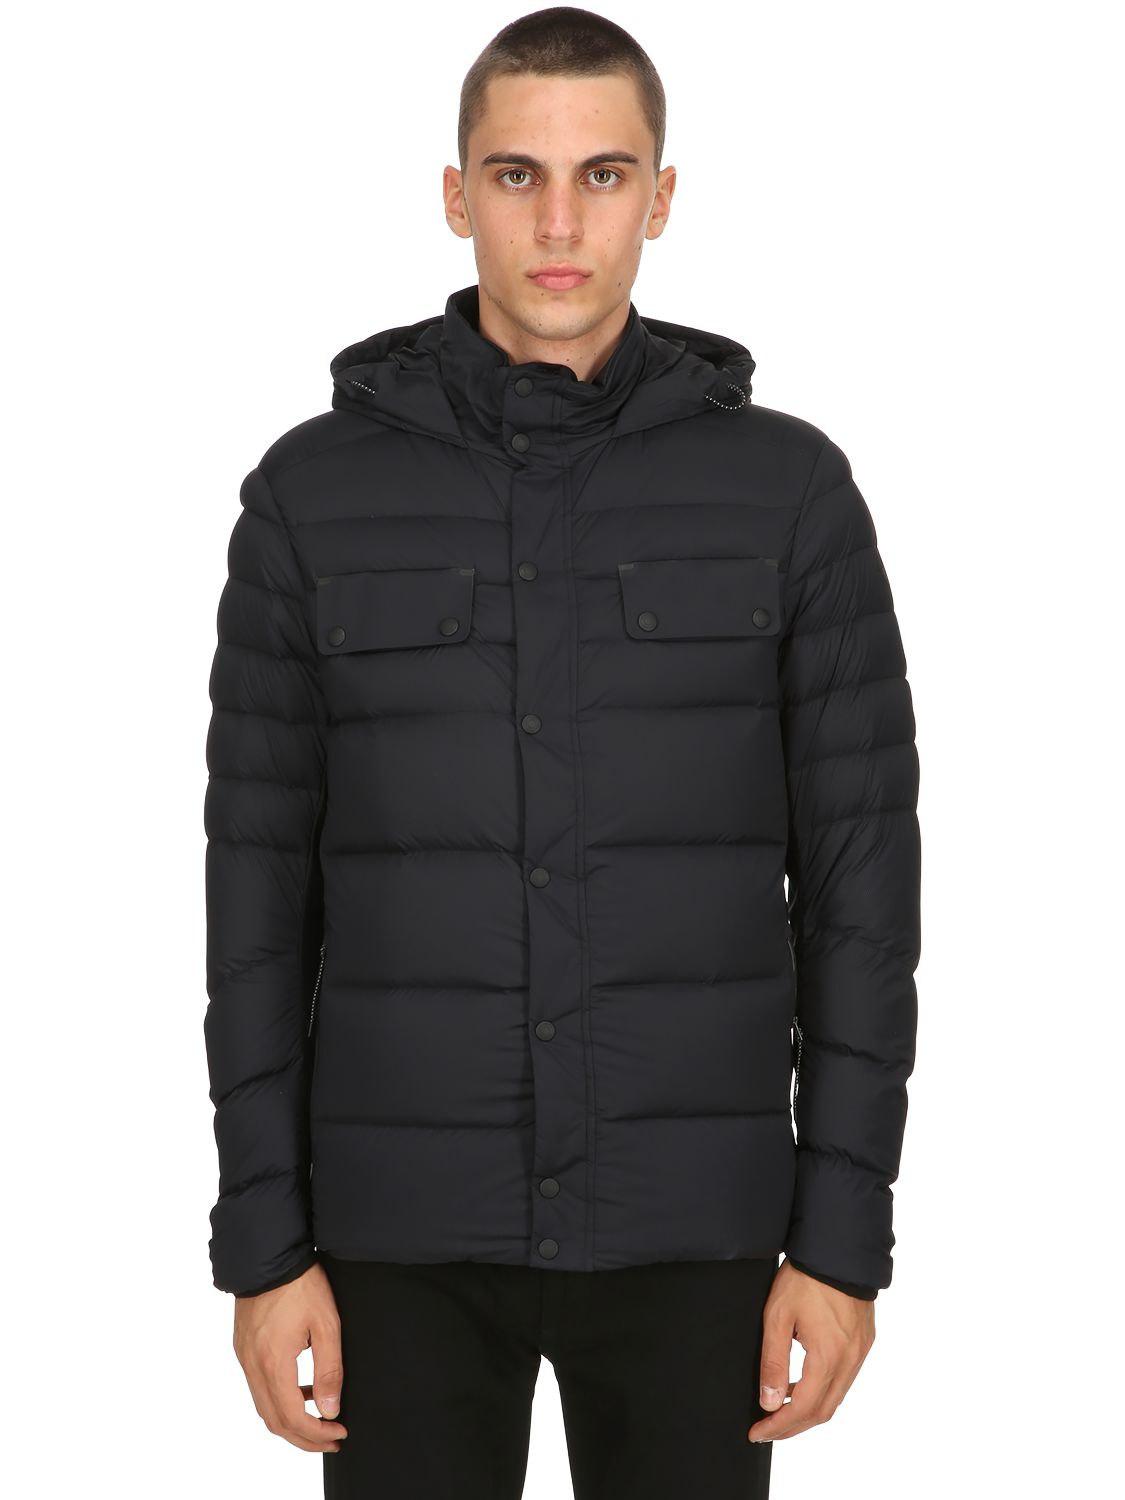 Belstaff Synthetic Atlas Quilted Jacket in Black for Men - Lyst